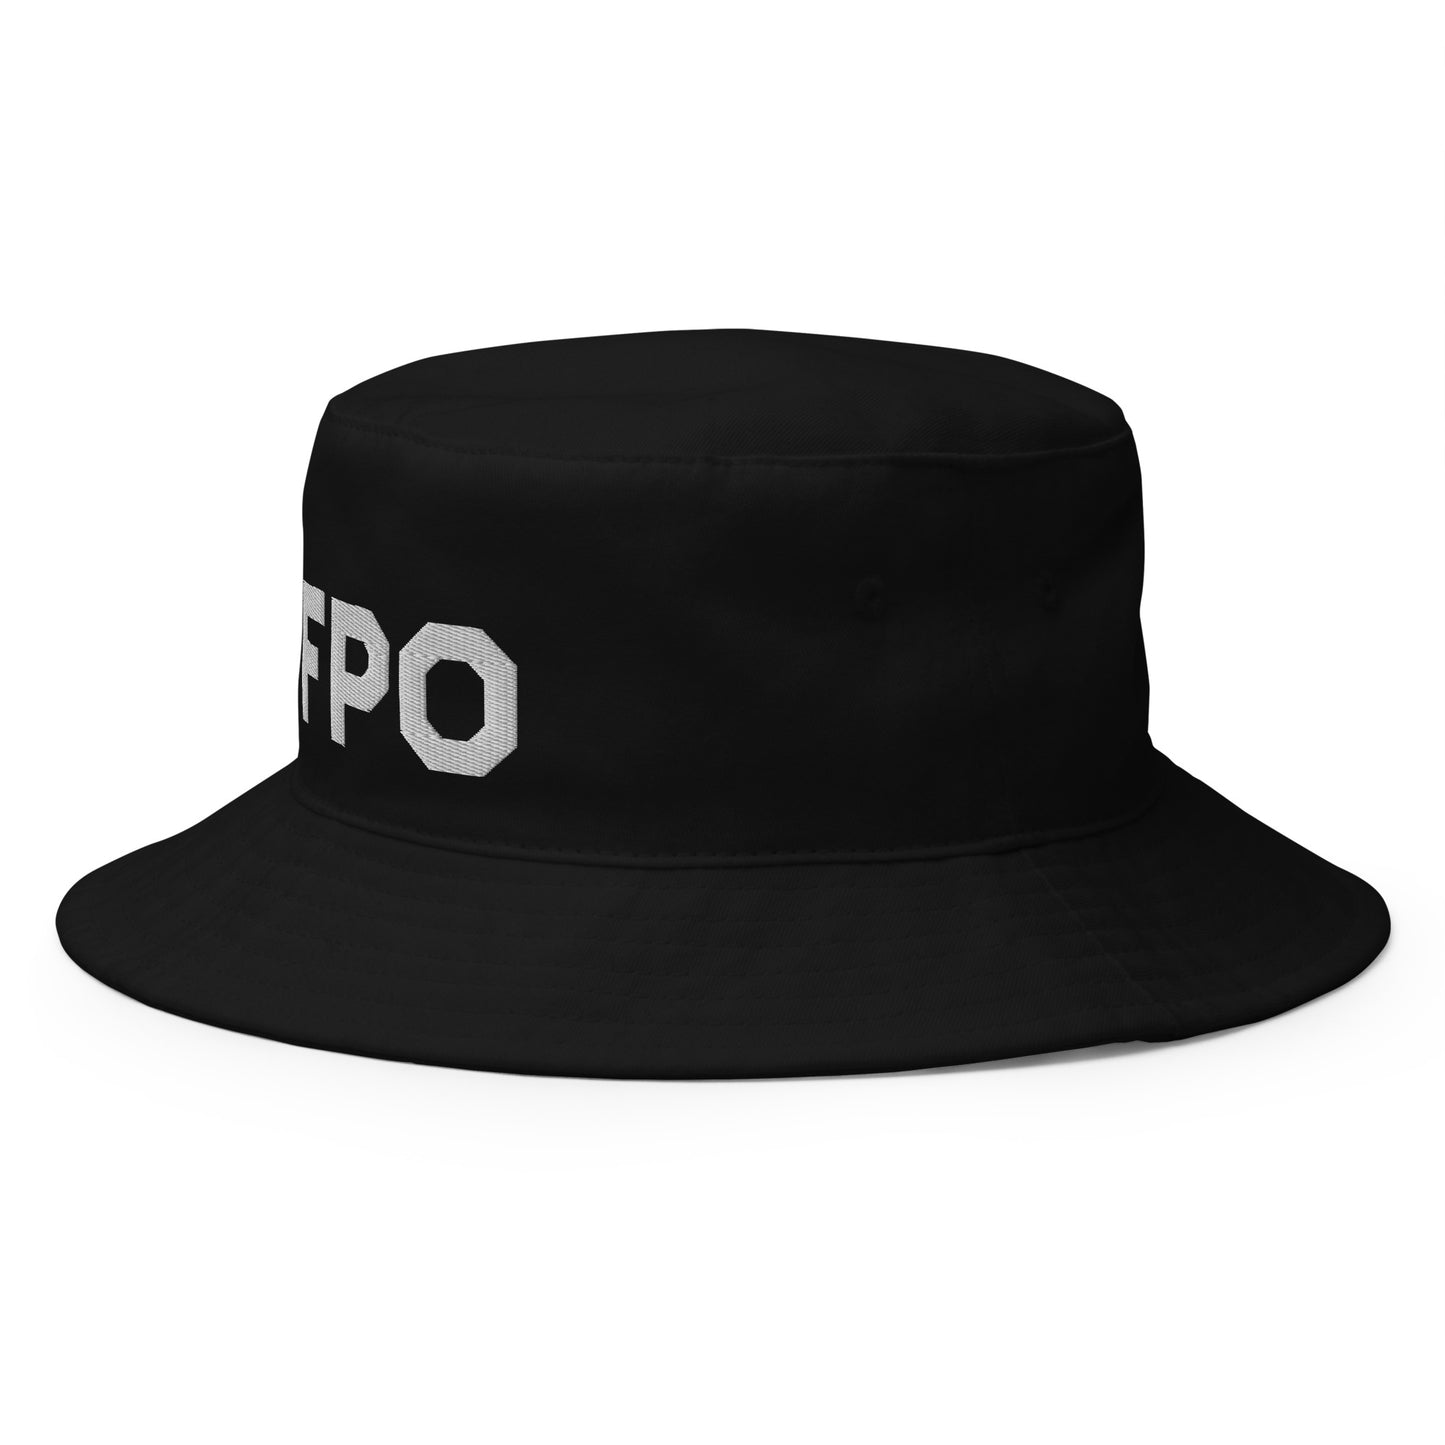 FPO Embroidered Bucket Hat